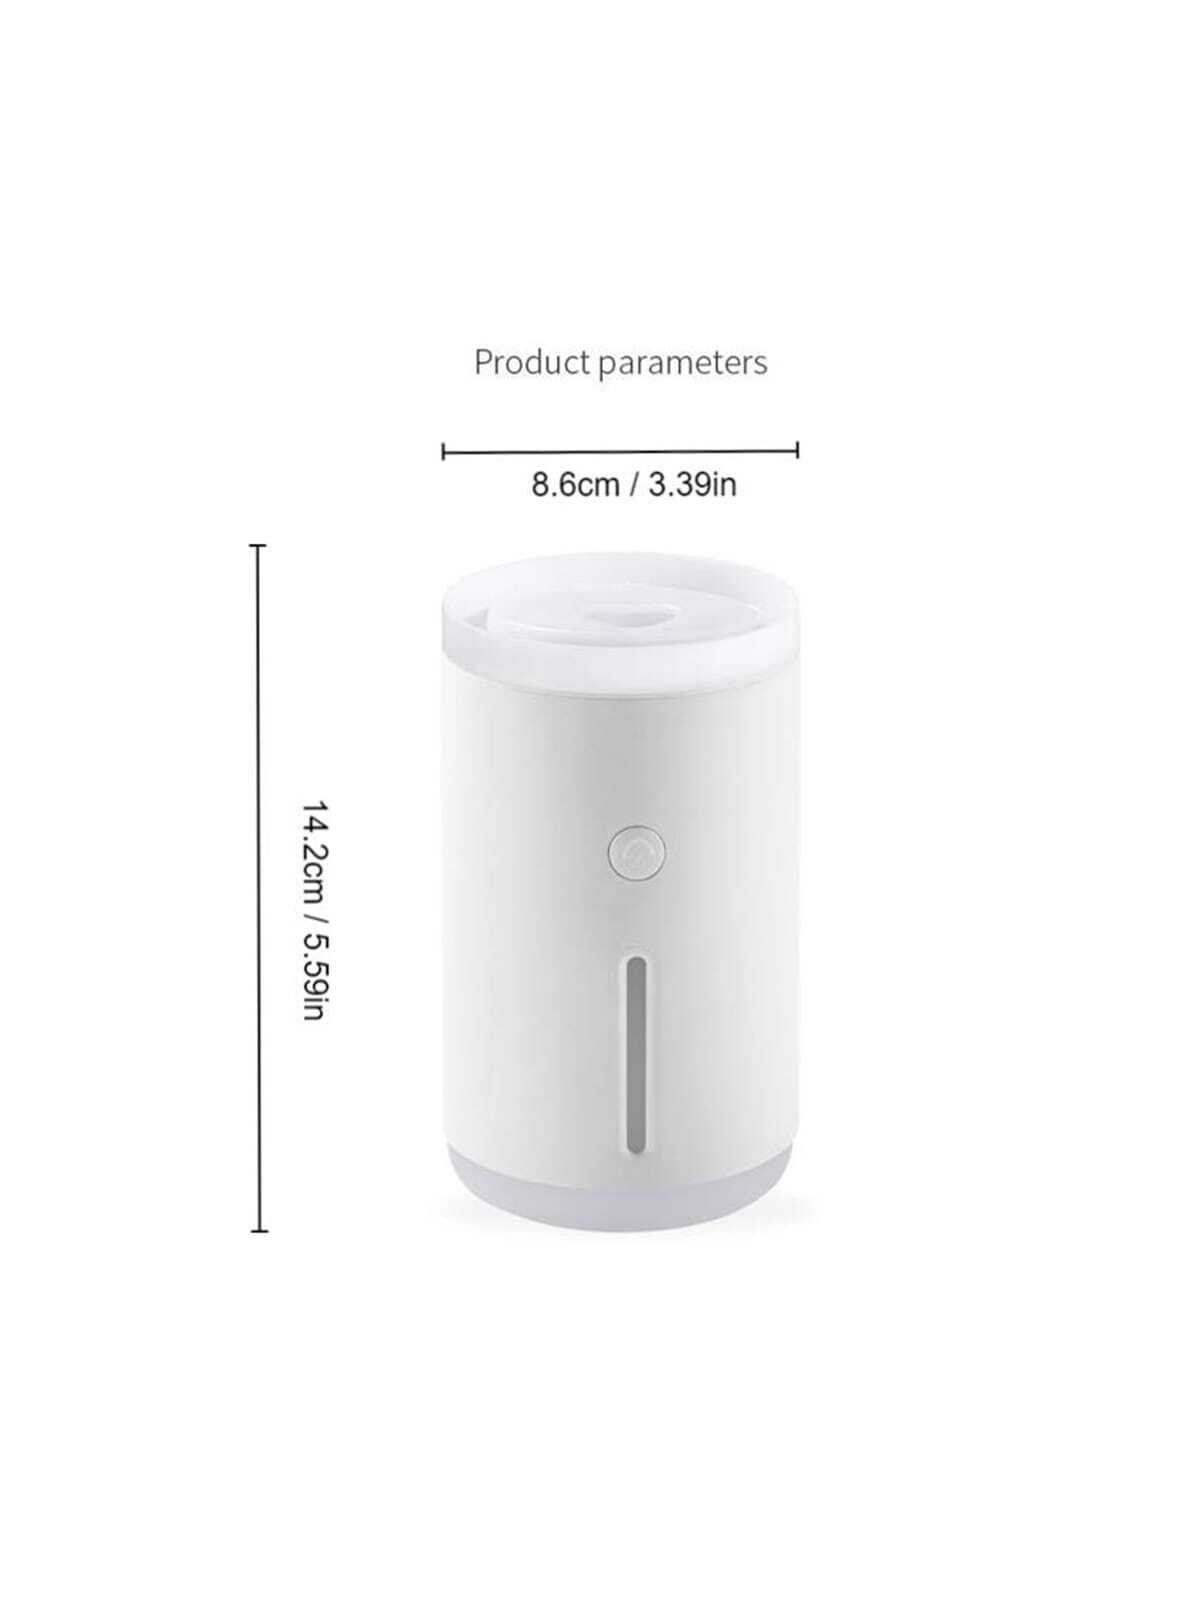 1pc V13 Usb Rechargeable White Color Aroma Humidifier For Home And Car Use, Jellyfish Spray And Direct Spray Modes, 3 Night Light Modes, Suitable For Bedroom Sleep And Car Air Purification-White-7